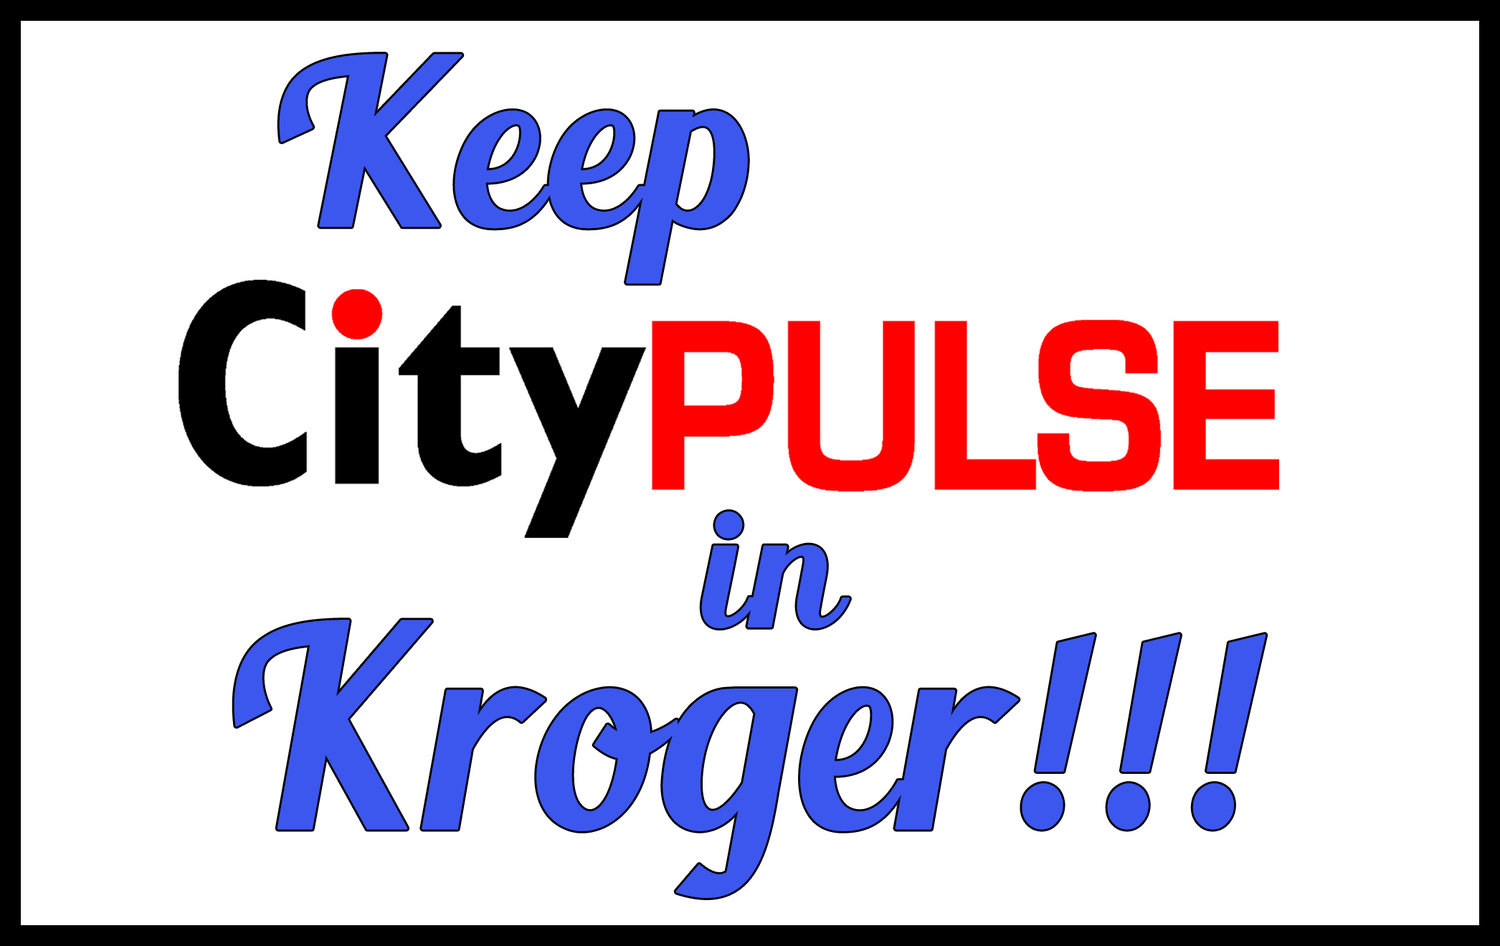 Kroger To Ghost City Pulse City Pulse